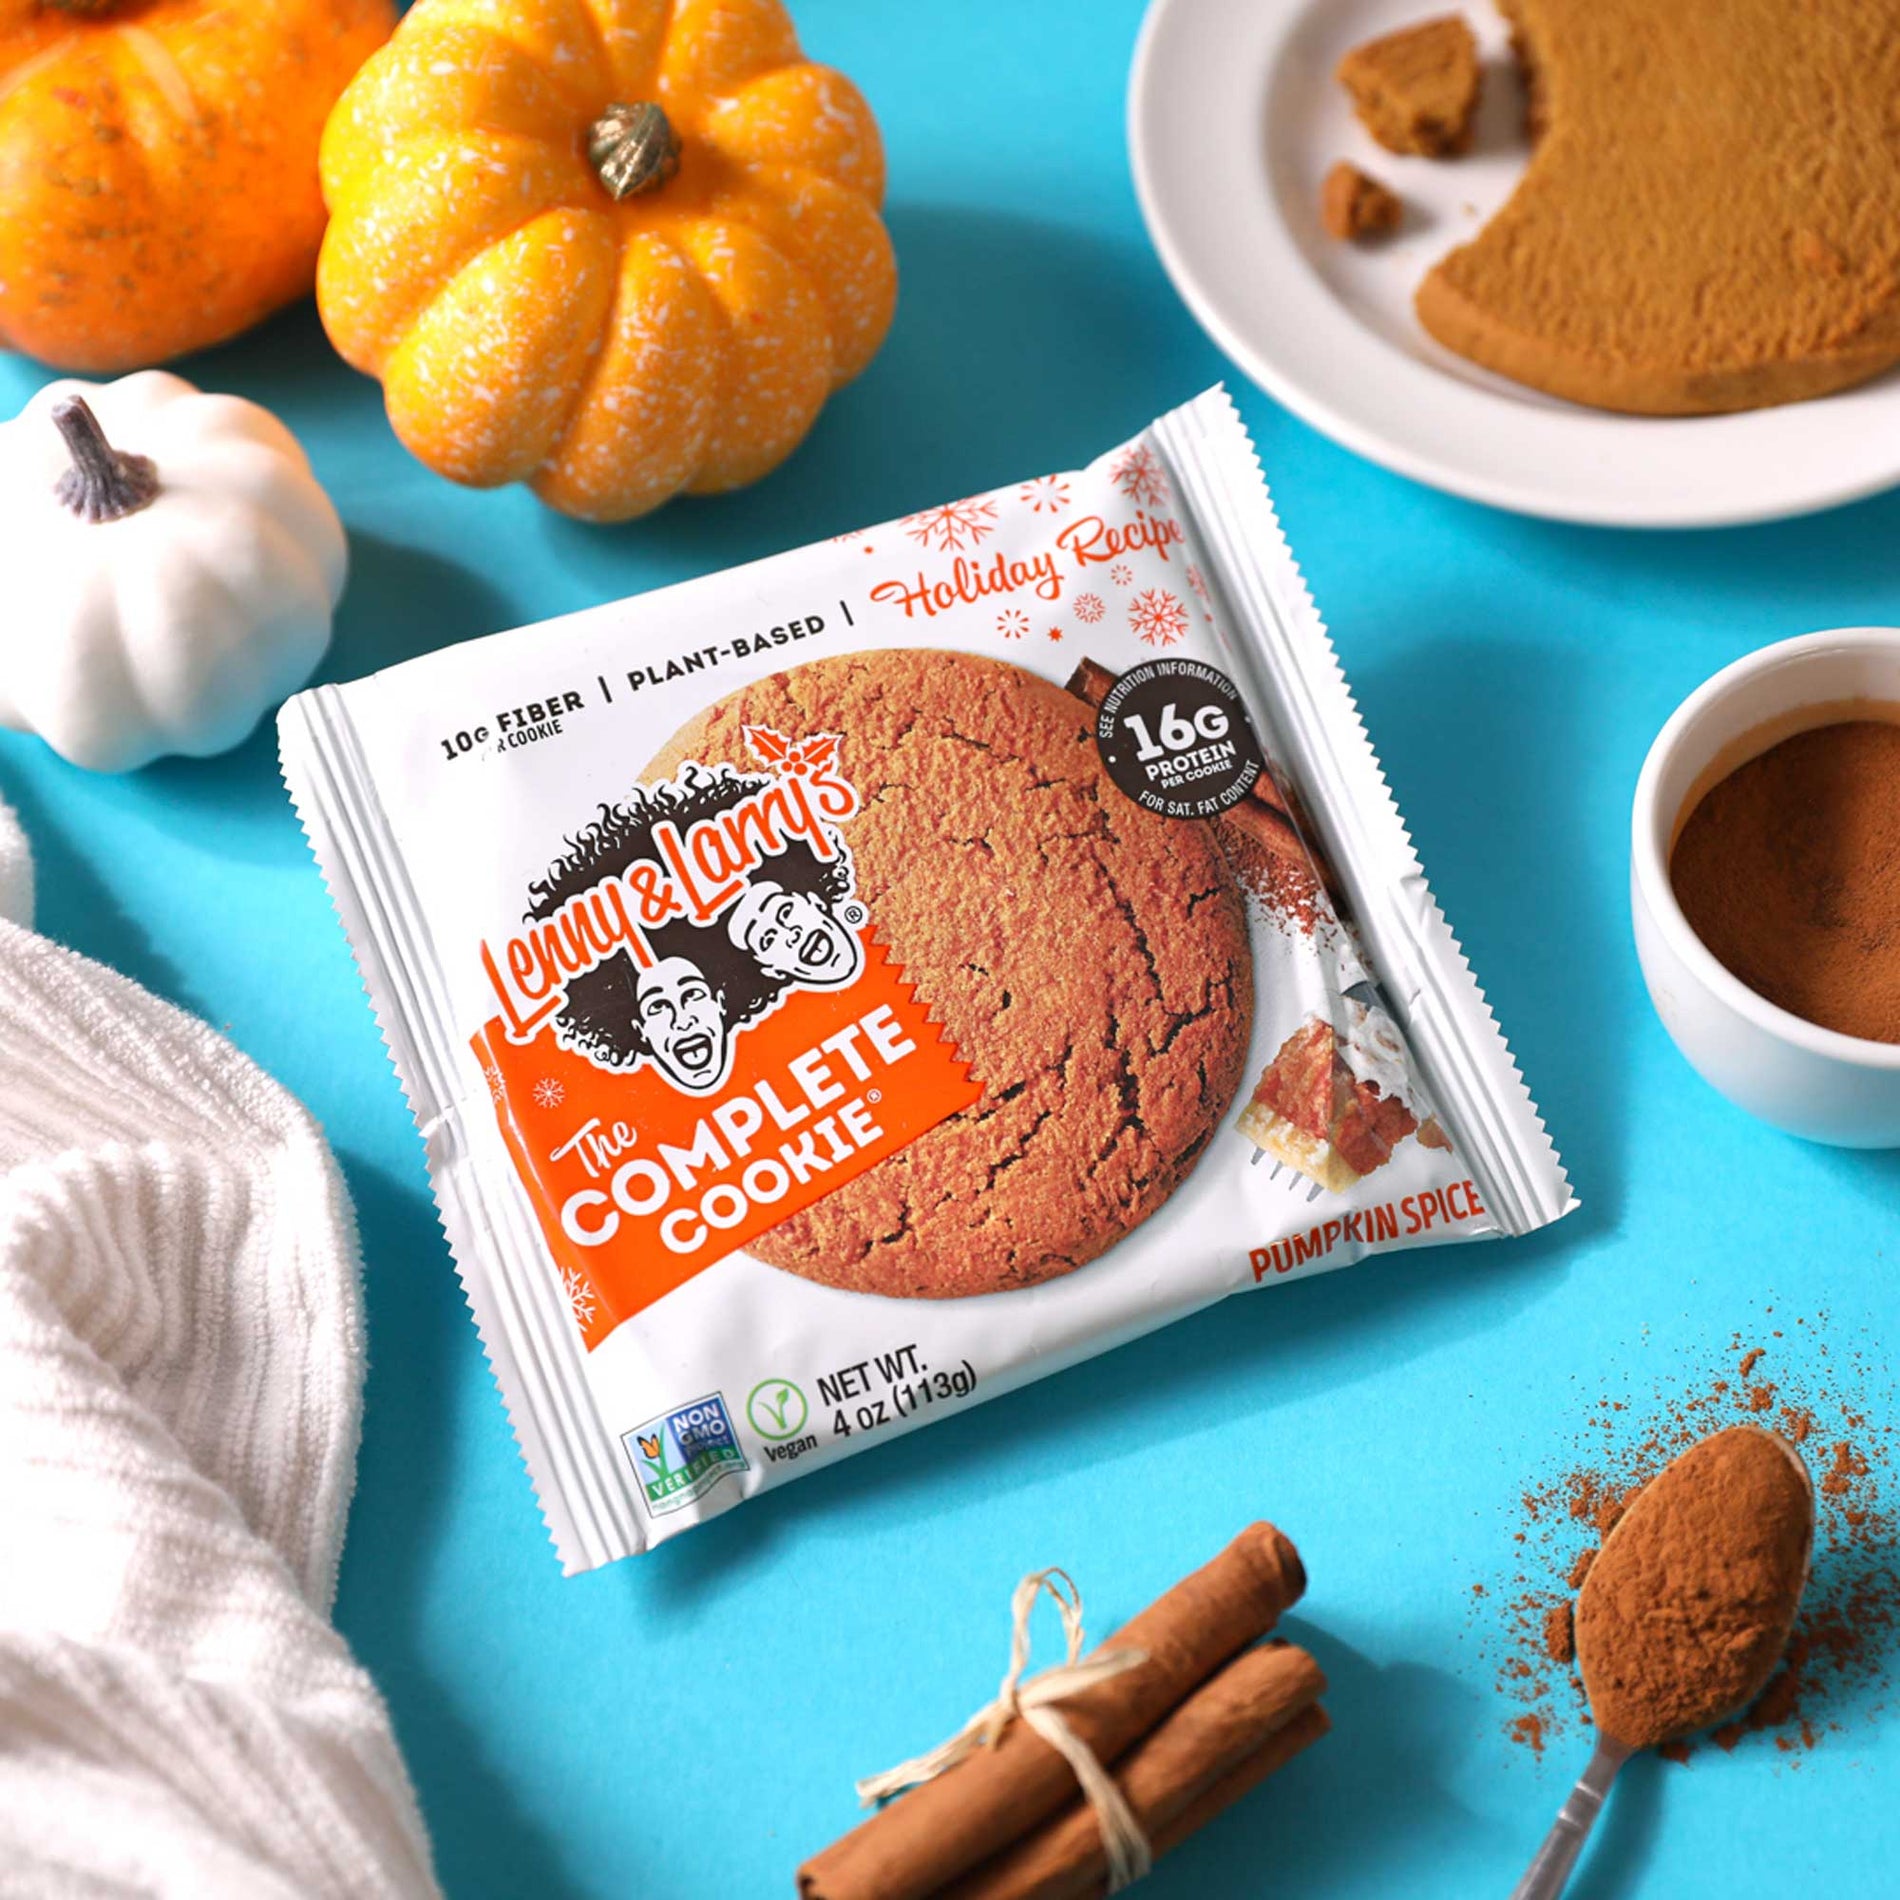 Every Must-Have Pumpkin Spice Product Available for 2020